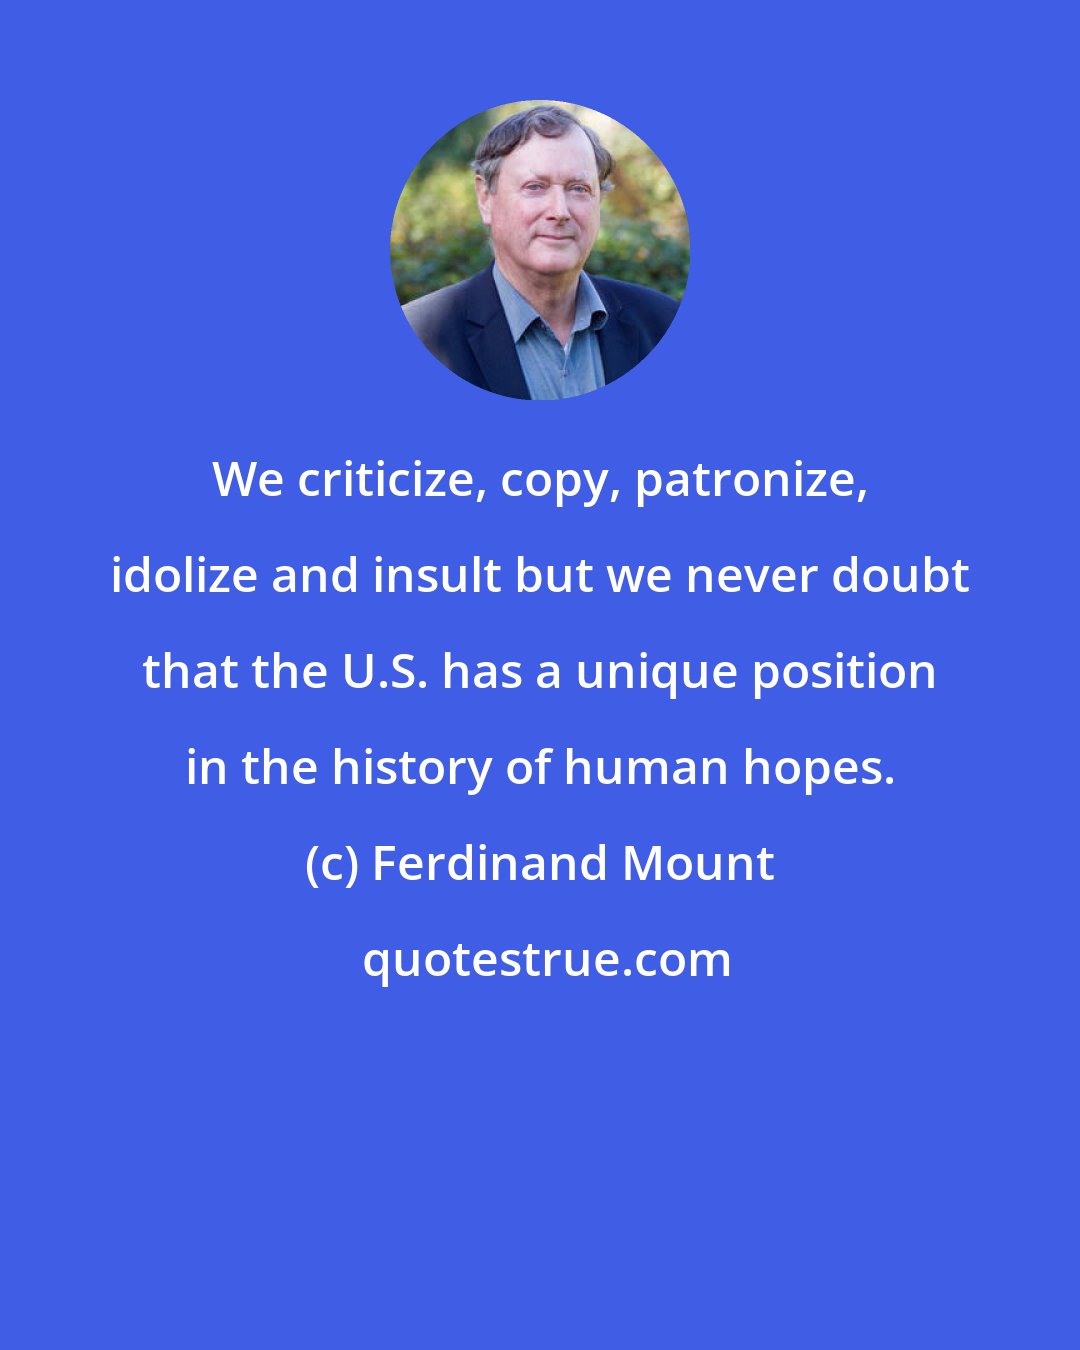 Ferdinand Mount: We criticize, copy, patronize, idolize and insult but we never doubt that the U.S. has a unique position in the history of human hopes.